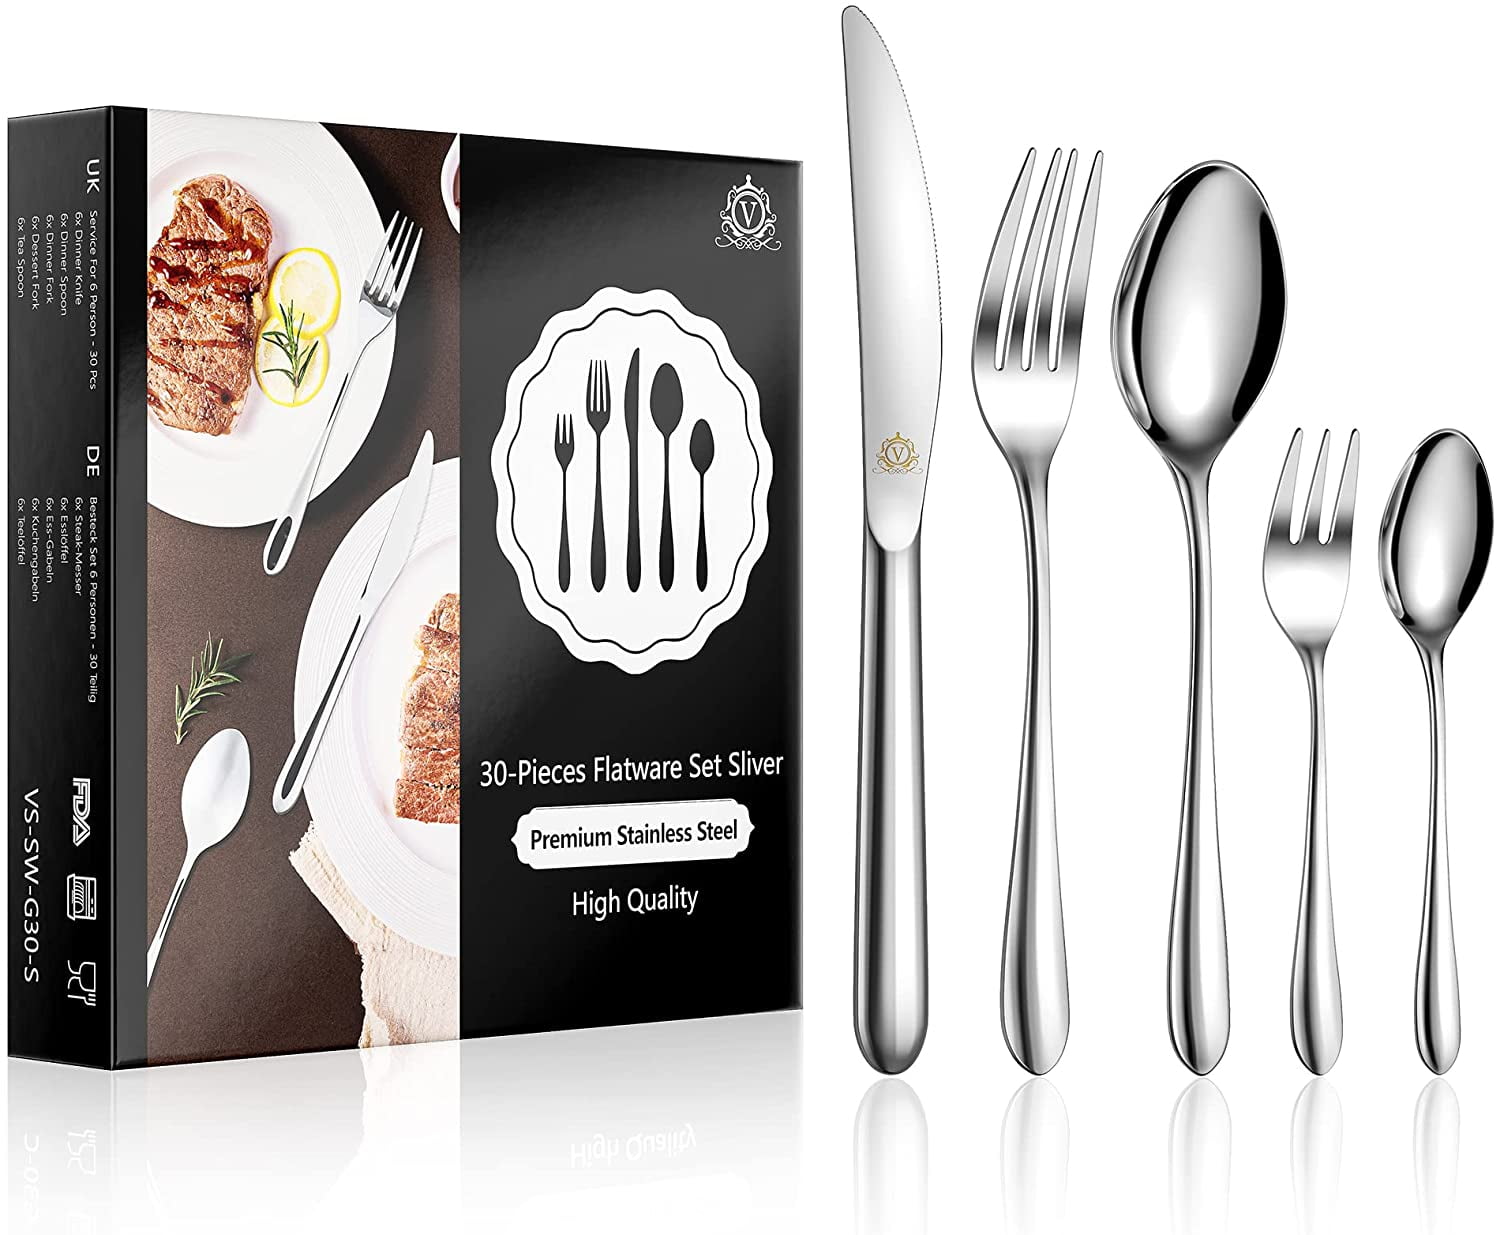 Black 4 Piece Salad Fork and Spoon Set Stainless Steel 7.8-inch Long Salad Servers Table Silverware 2 Set Dishwasher Safe 